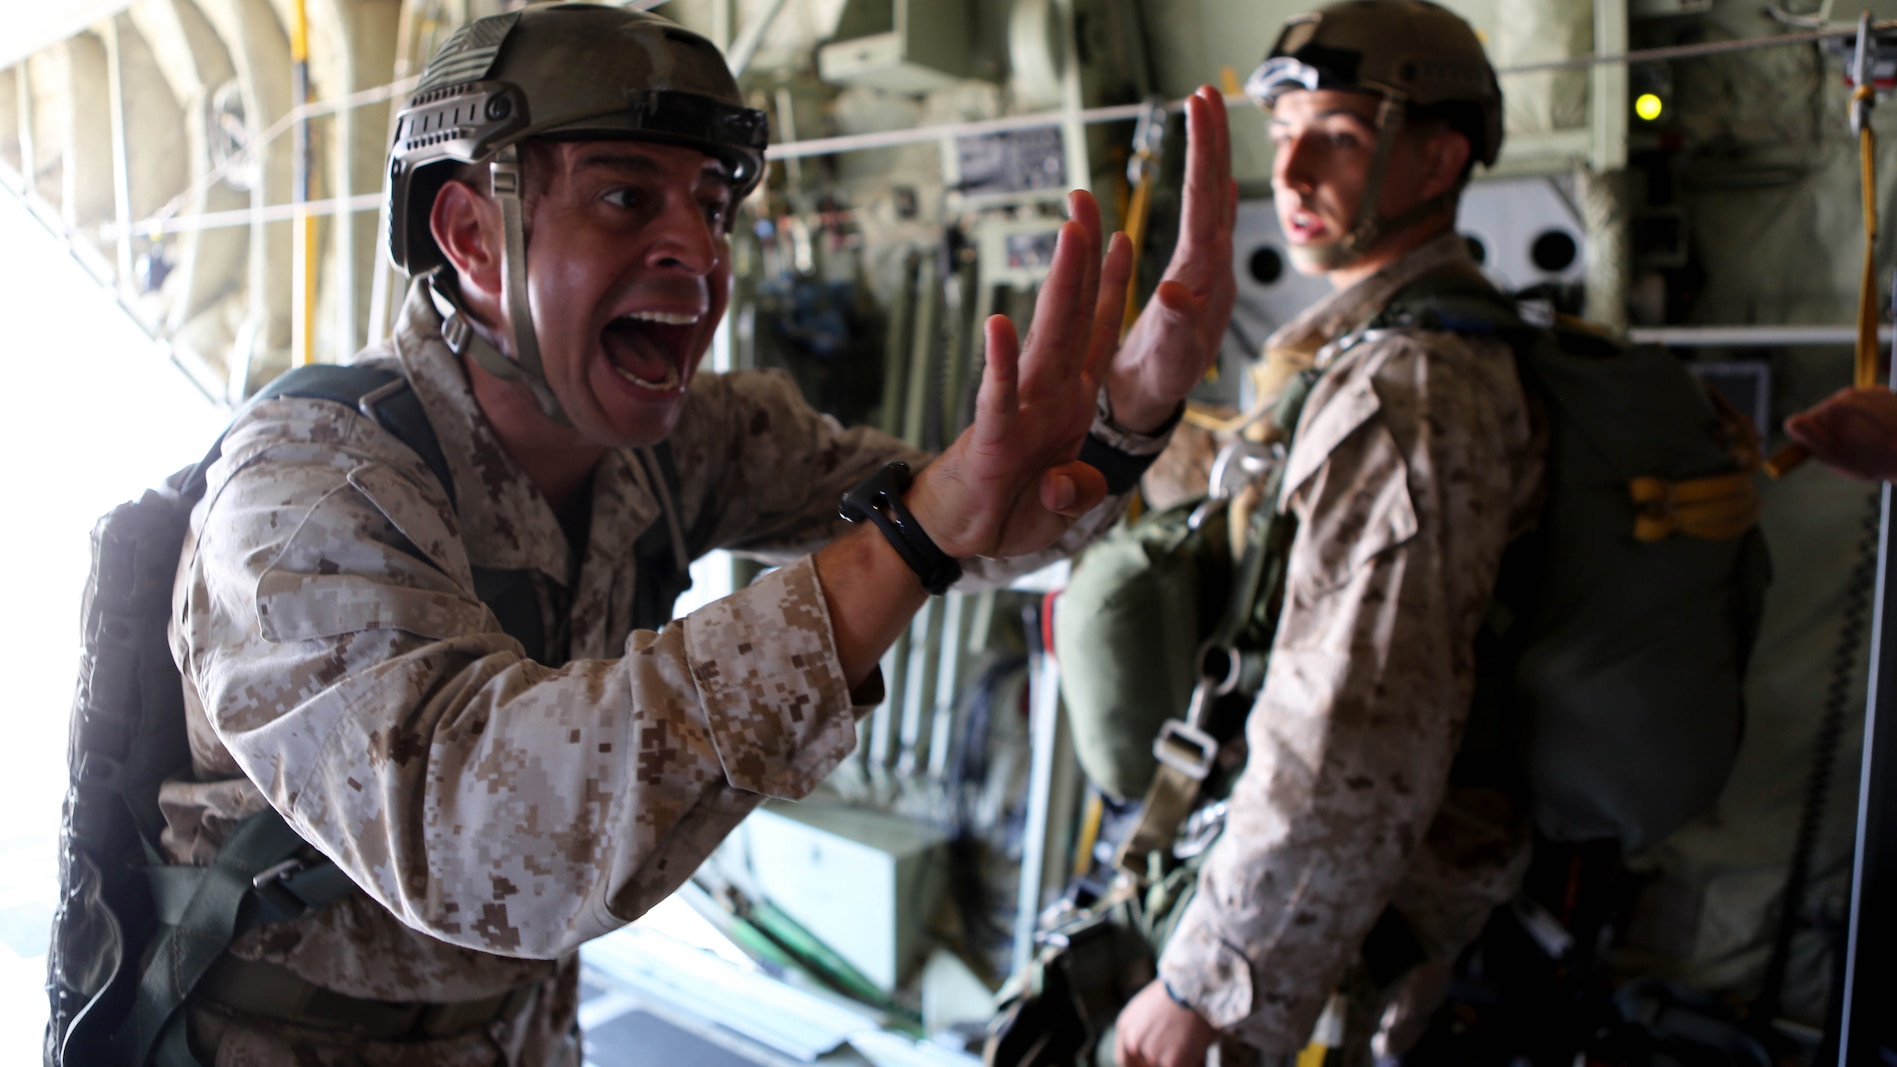 Gunnery Sgt. Gabriel Machado, an airborne and air delivery specialist with 1st Reconnaissance Battalion, 1st Marine Division, notifies a jump team of the estimated time of departure during static-line parachute operations and free fall jump training aboard Marine Corps Base Camp Pendleton, Calif., Oct. 16, 2015. 1st Recon conducted parachute operations in preparation for future deployments.